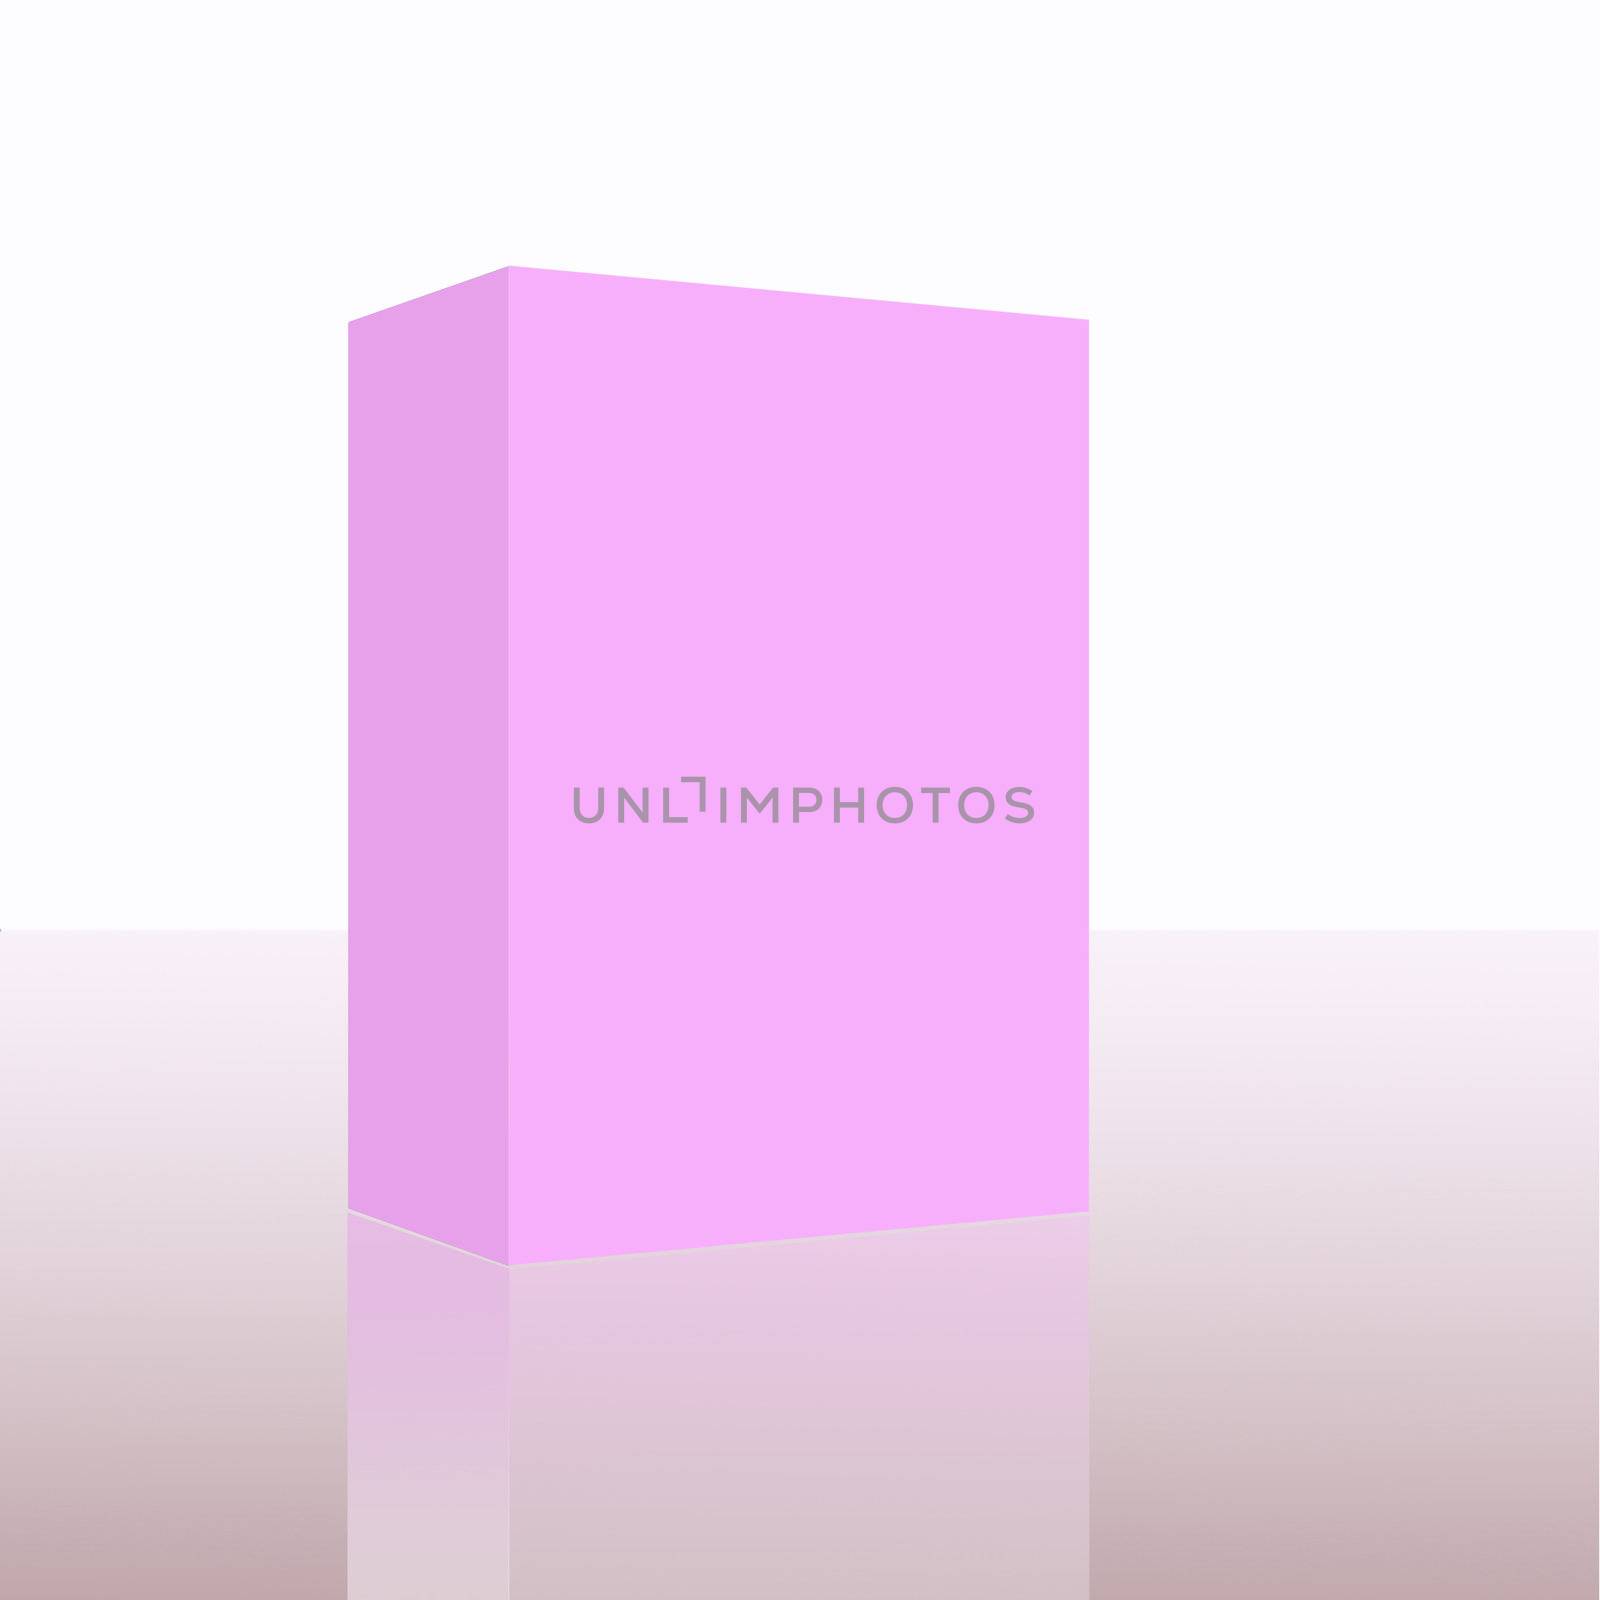 3D render of a blank box high-res blank box. fill in your own graphic to make this an e-box, book, software box or a box your choice